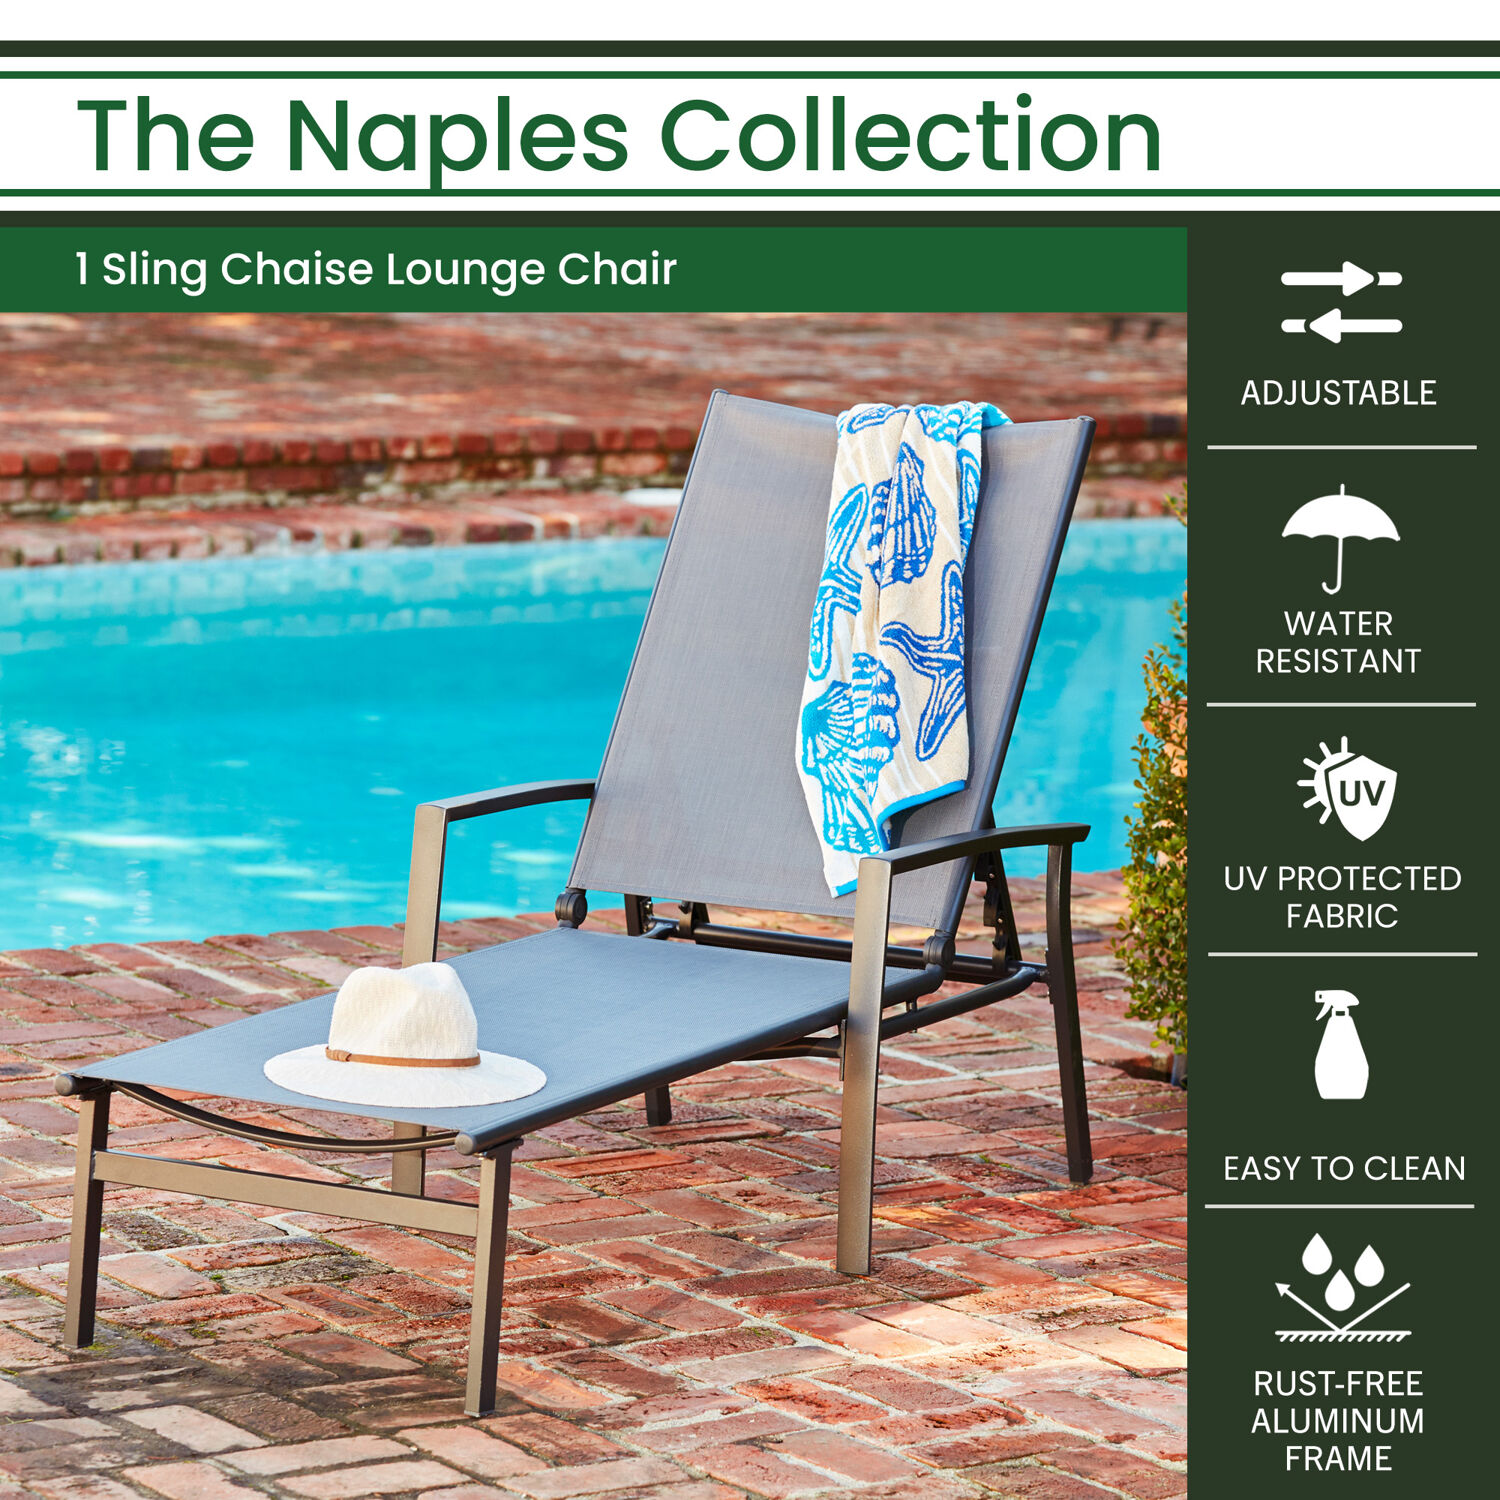 Hanover Naples Outdoor Folding Chaise Lounge Chair with Adjustable Backrest | Patio and Poolside Lounging Chair | UV and Weather-Resistant Sling Fabric | NAPLESCHS-GRY - image 5 of 16